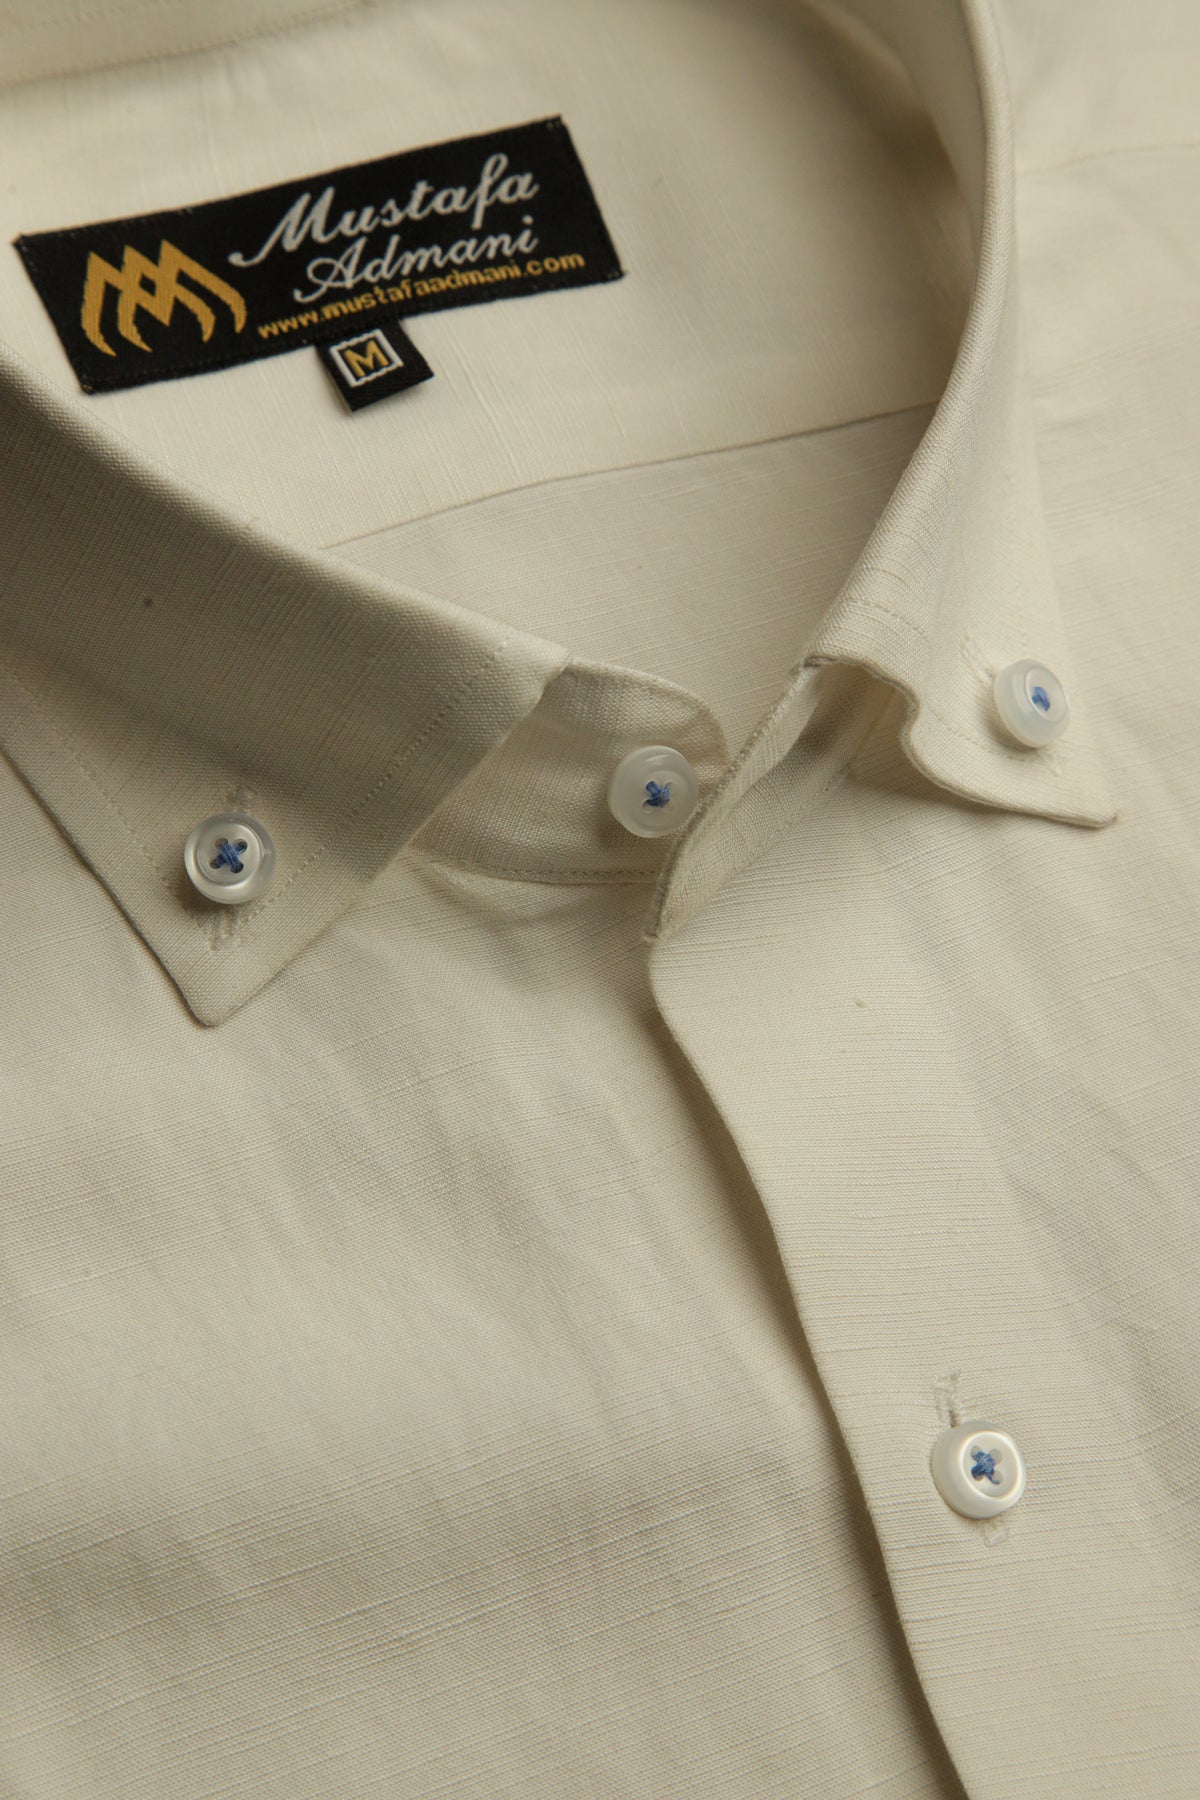 Self White Button Down Shirt With Blue Details.